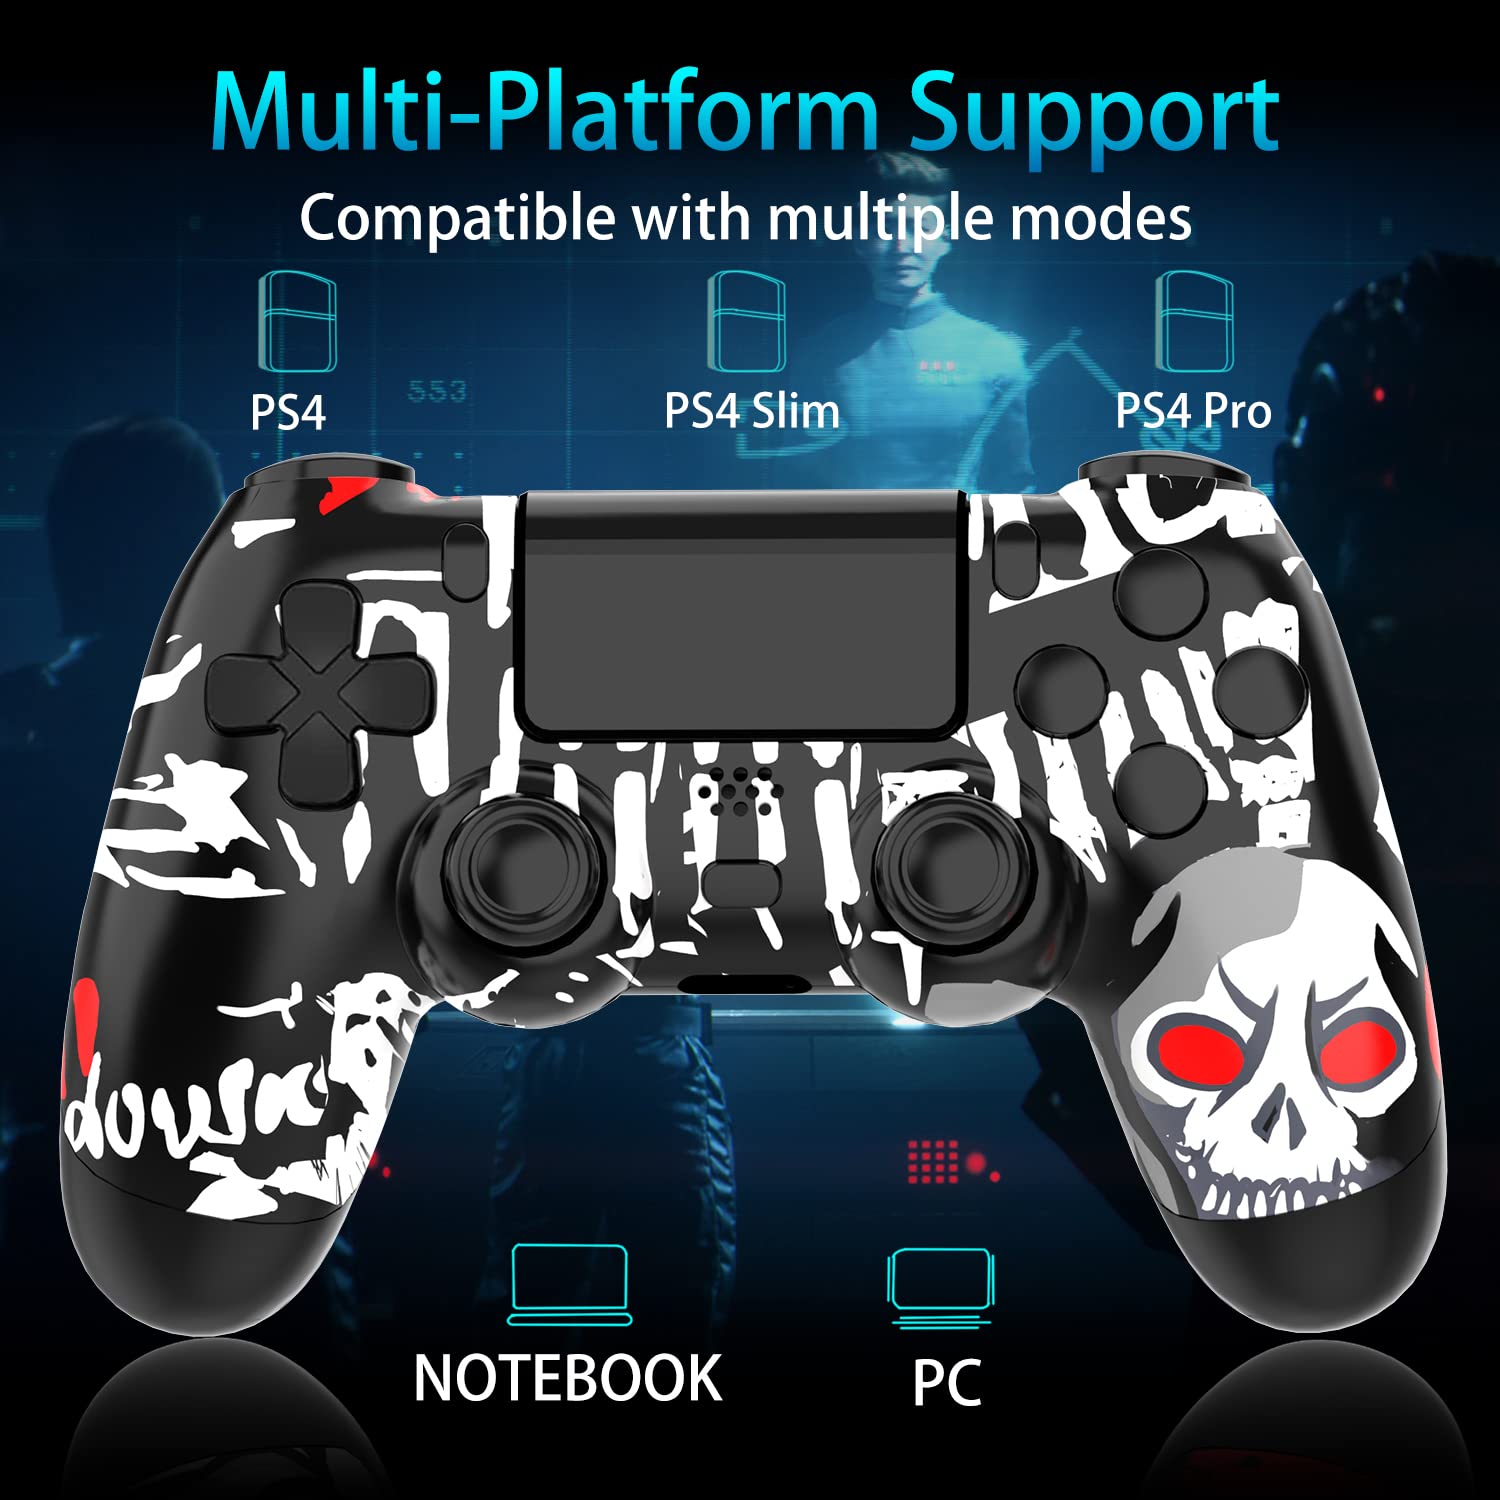 YUYIU 【Upgraded】 Wireless Controller for Ps4 Remote Plays-tation 4/Slim/Pro/PC, Gaming Controllers with Dual Vibration Shock Speaker, Camo Red with Headphone Jack Touch Pad Six Axis Motion Control